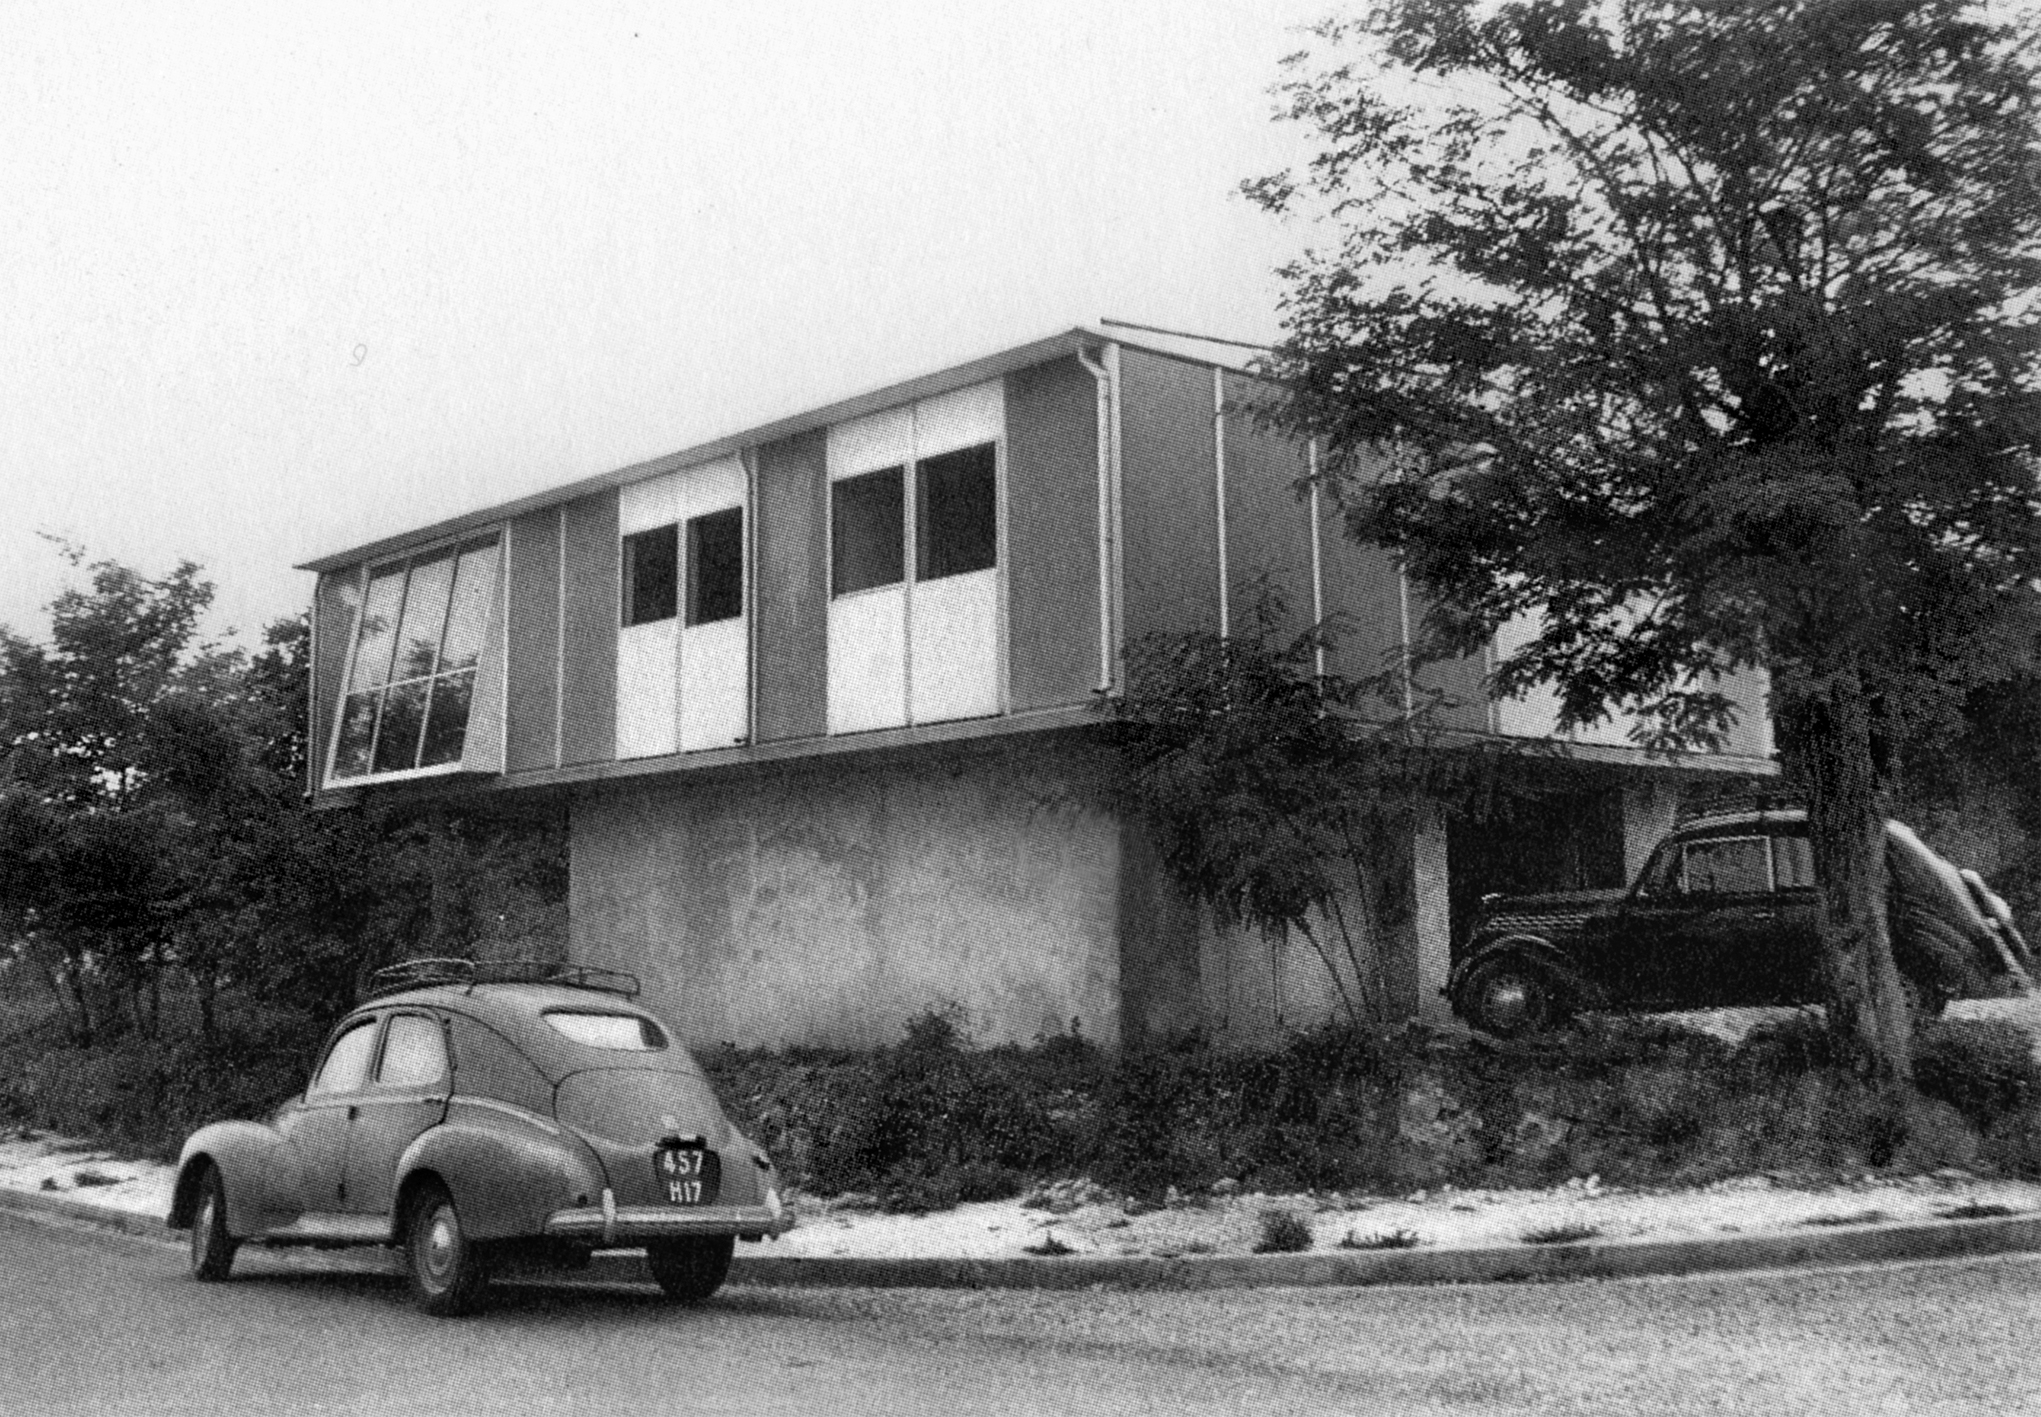 Métropole demountable house. The raised 8x12 house installed at Royan by the Ministry of Reconstruction and Town Planning, 1951.